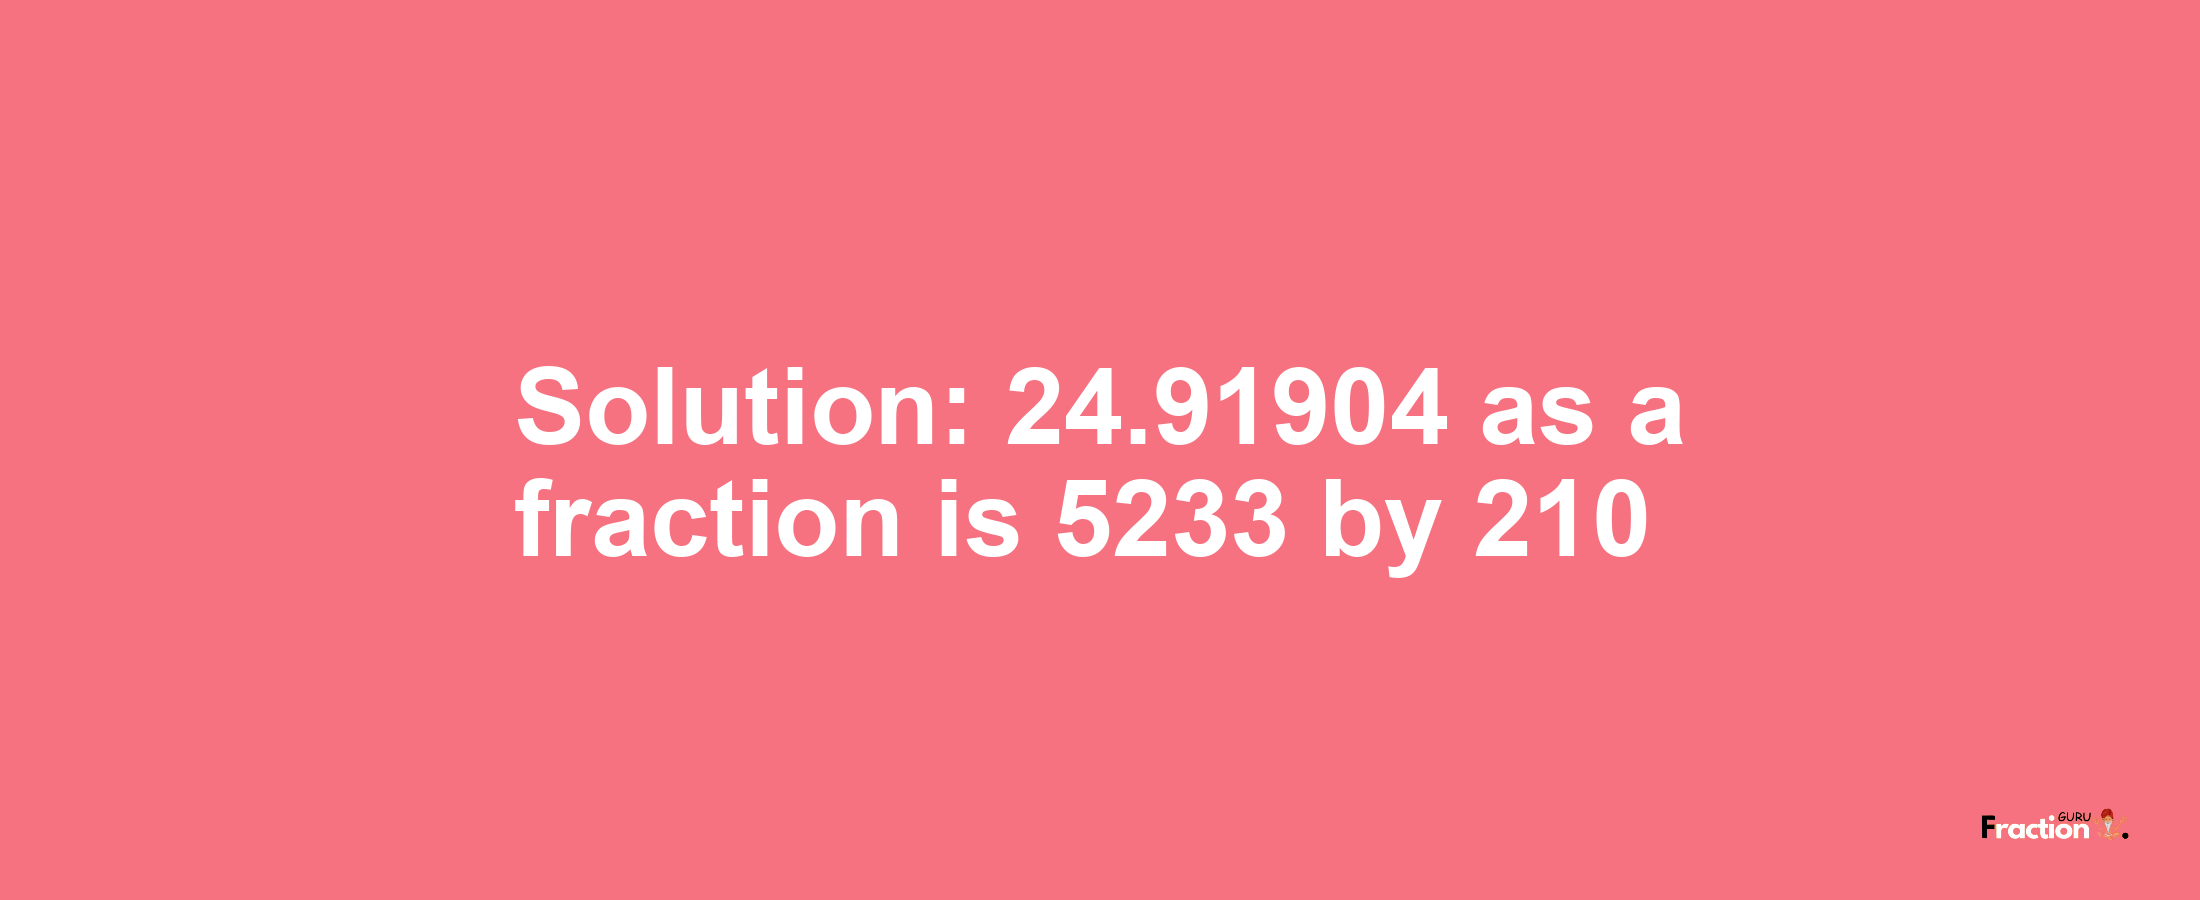 Solution:24.91904 as a fraction is 5233/210